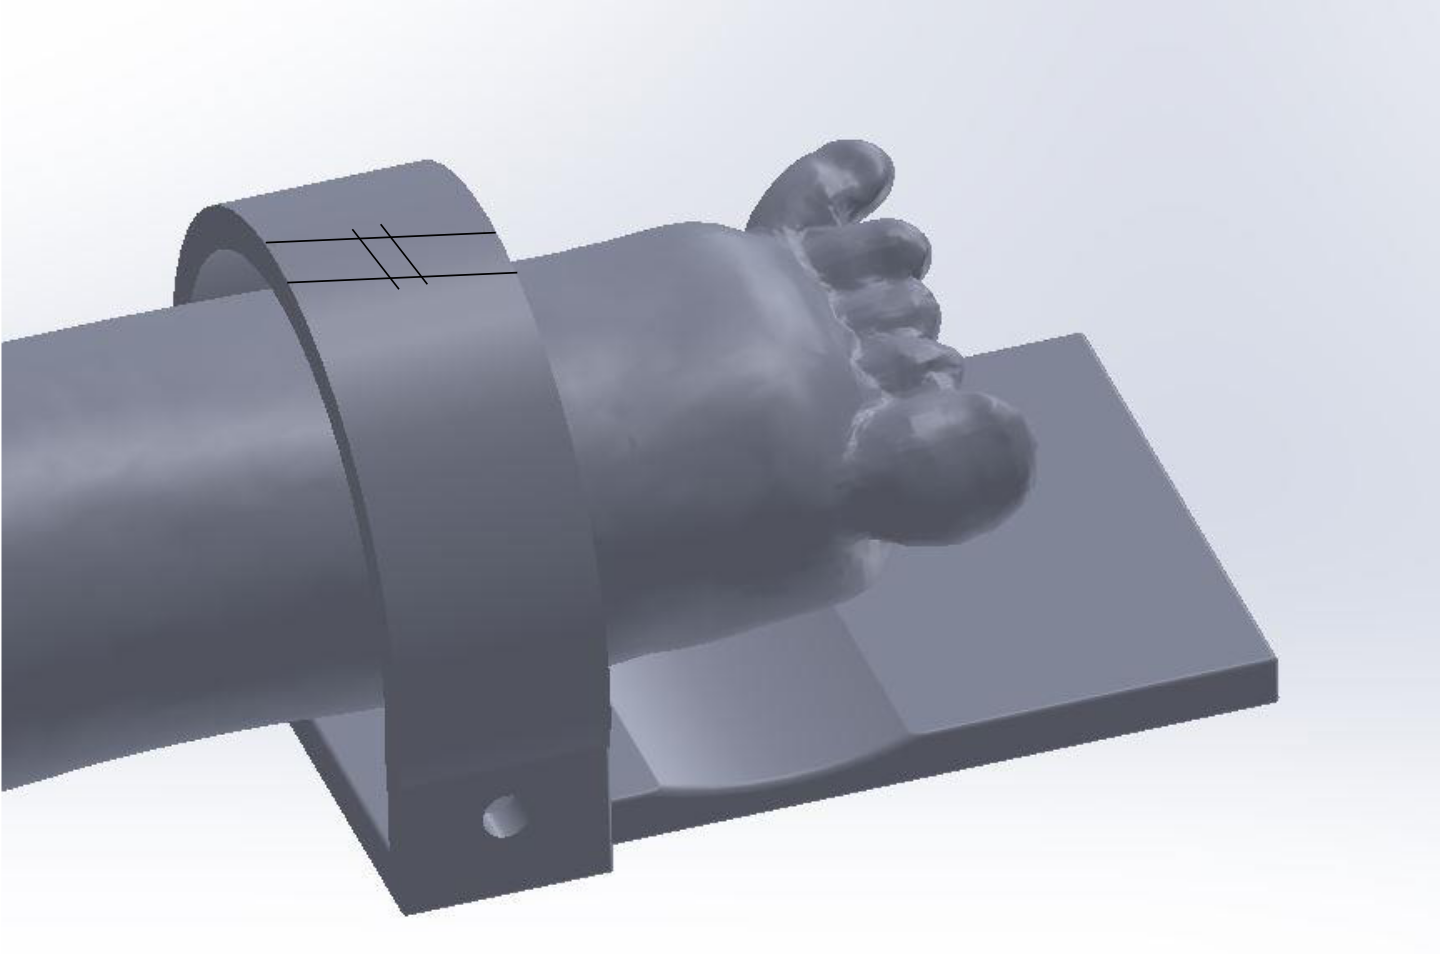 Solidworks image showing rough concept of swimming device